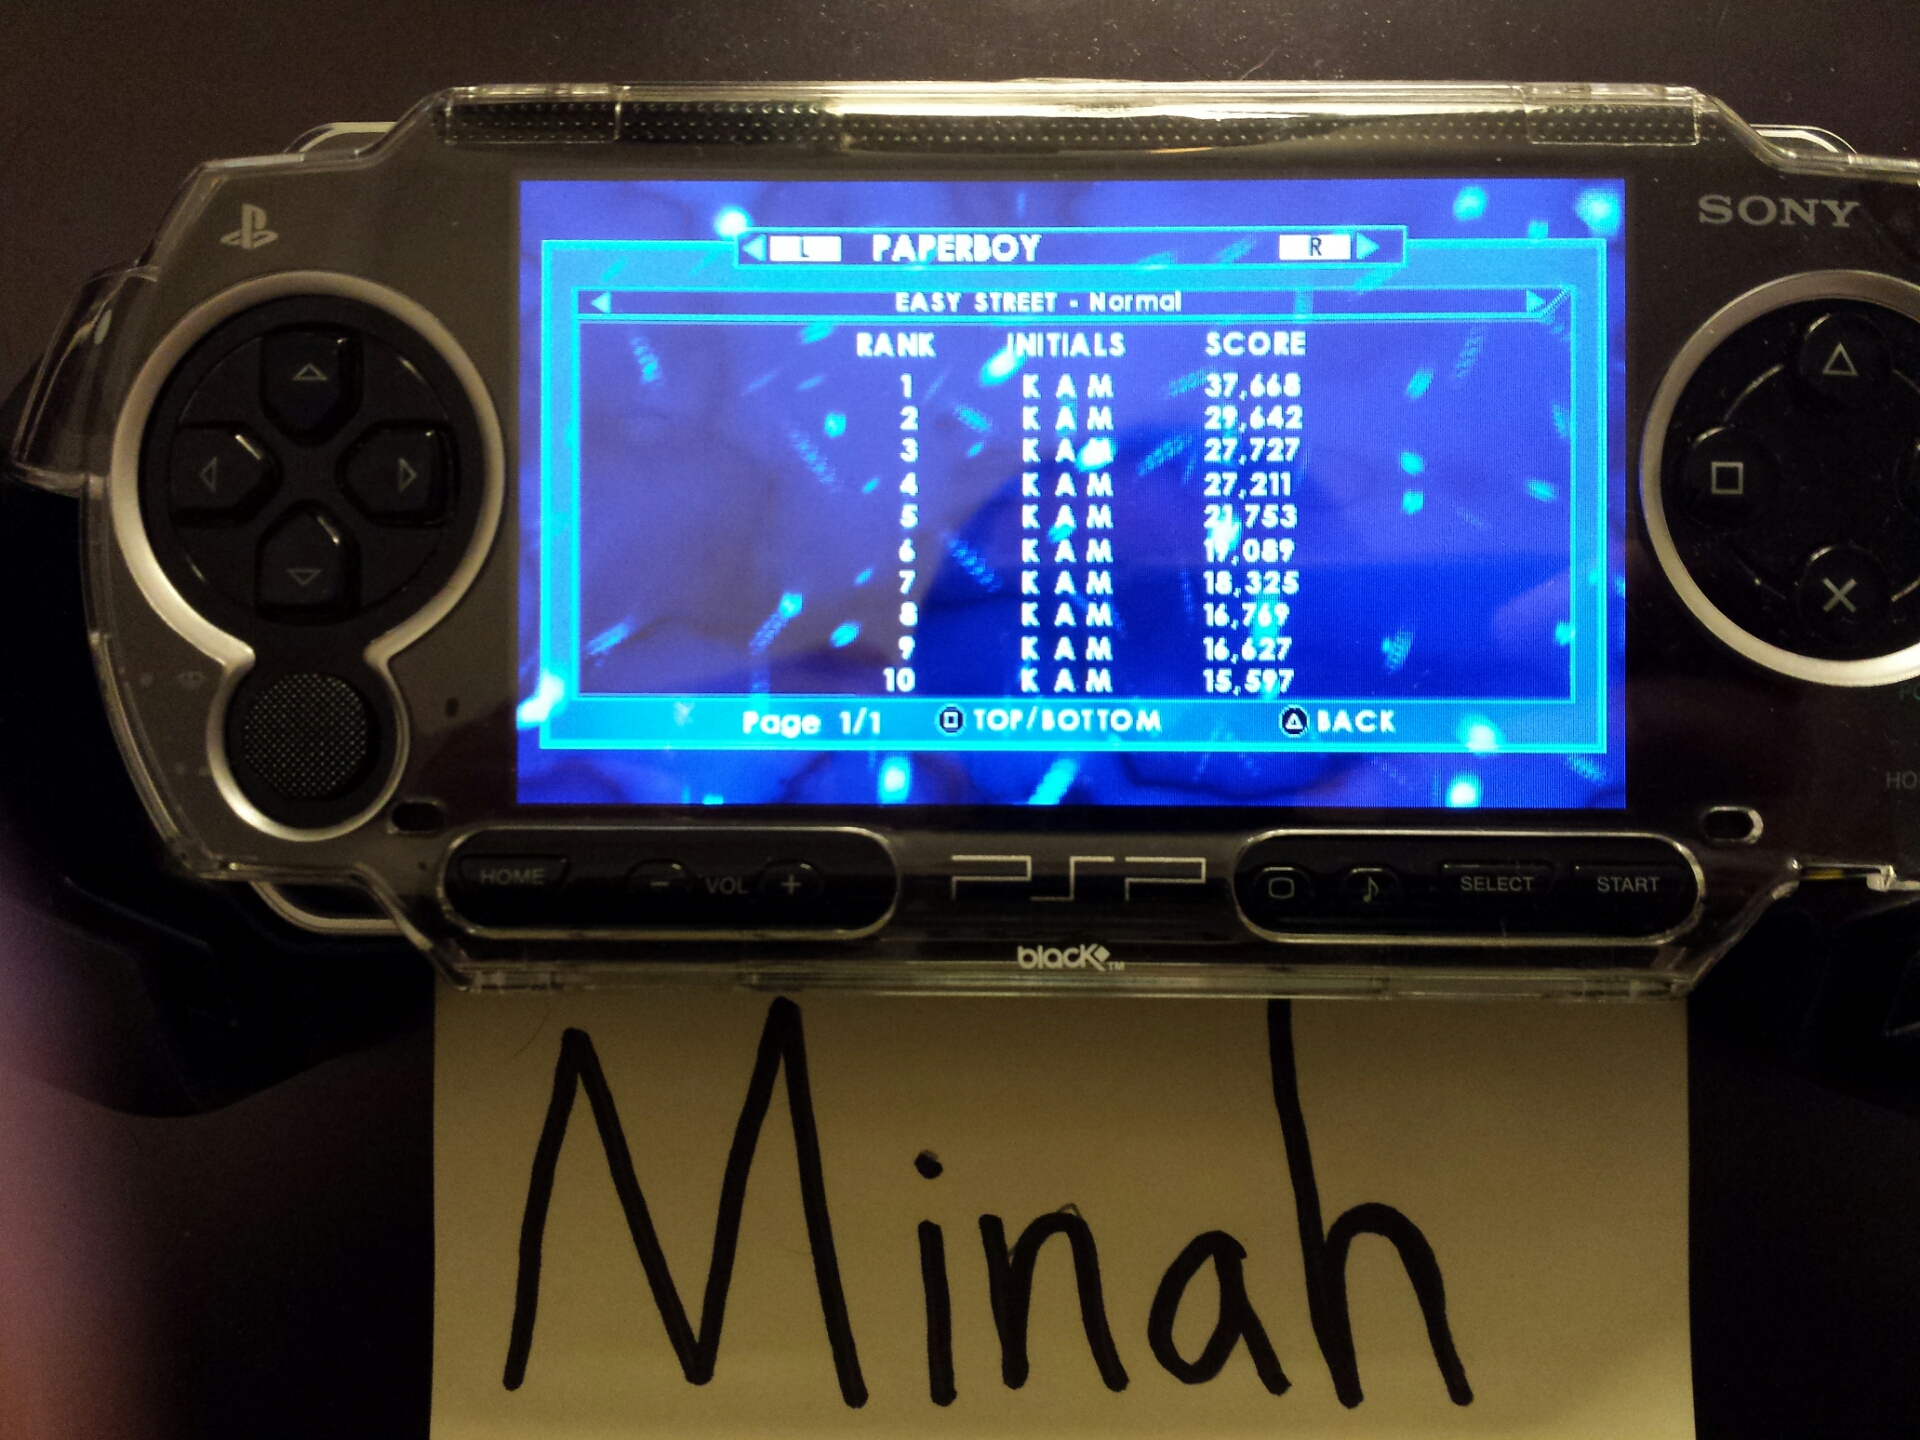 minah: Midway Arcade Treasures: Extended Play: Paperboy (PSP) 37,668 points on 2014-10-06 19:47:19